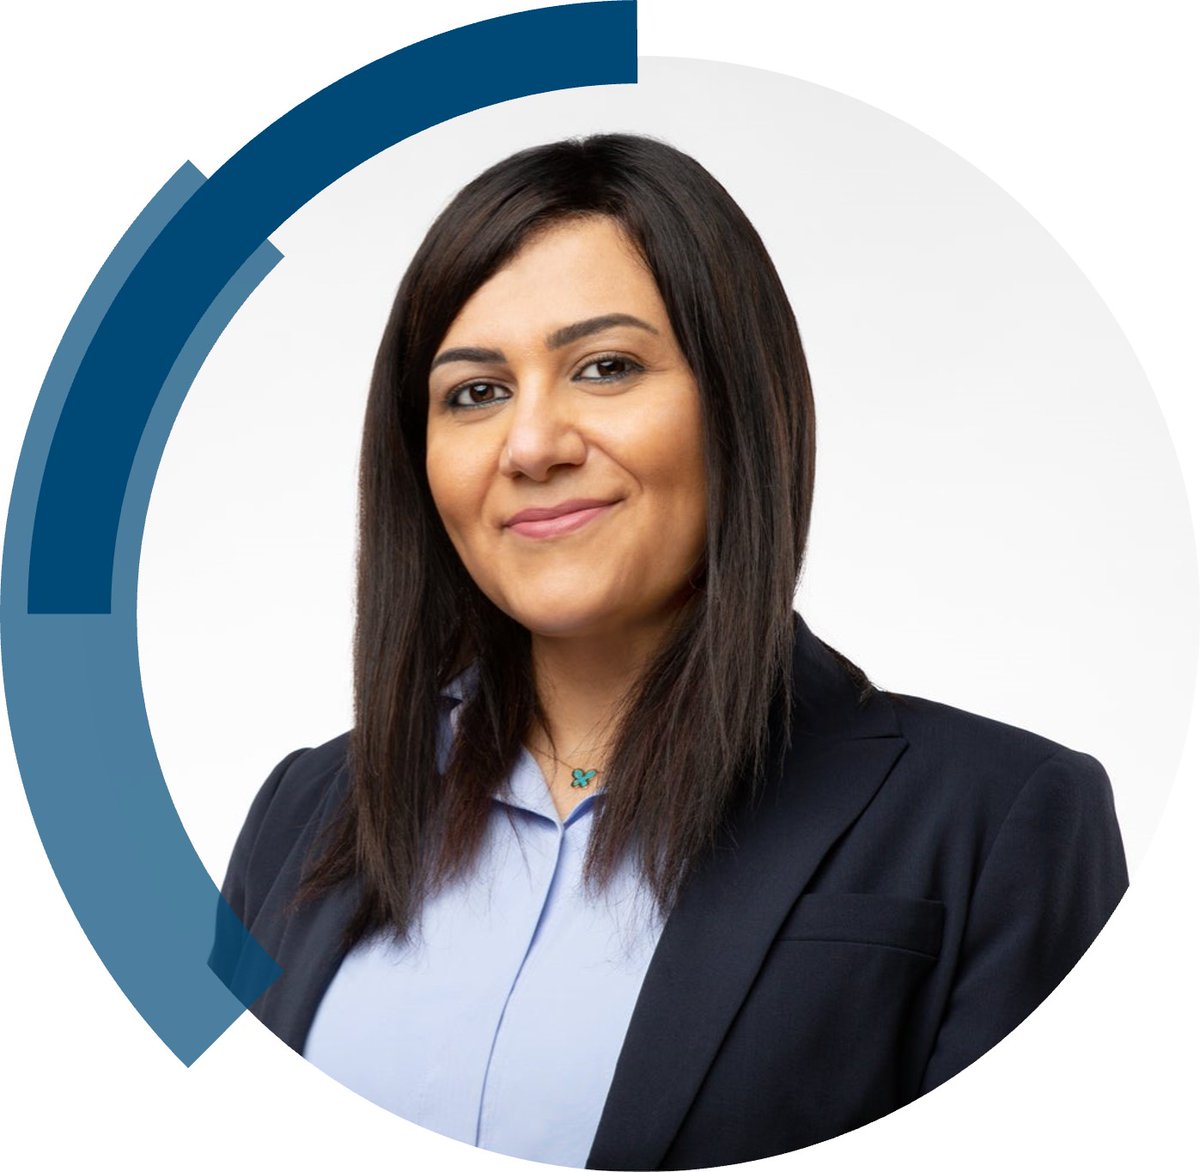 We are delighted to announce that Professor Niveen M. Khashab (KAUST) is the recipient of this year’s Cram Lehn Pedersen Prize in Supramolecular Chemistry 🏆 @ShmsLab Find out more about the prize and Niveen on our blog rsc.li/3ImboCW